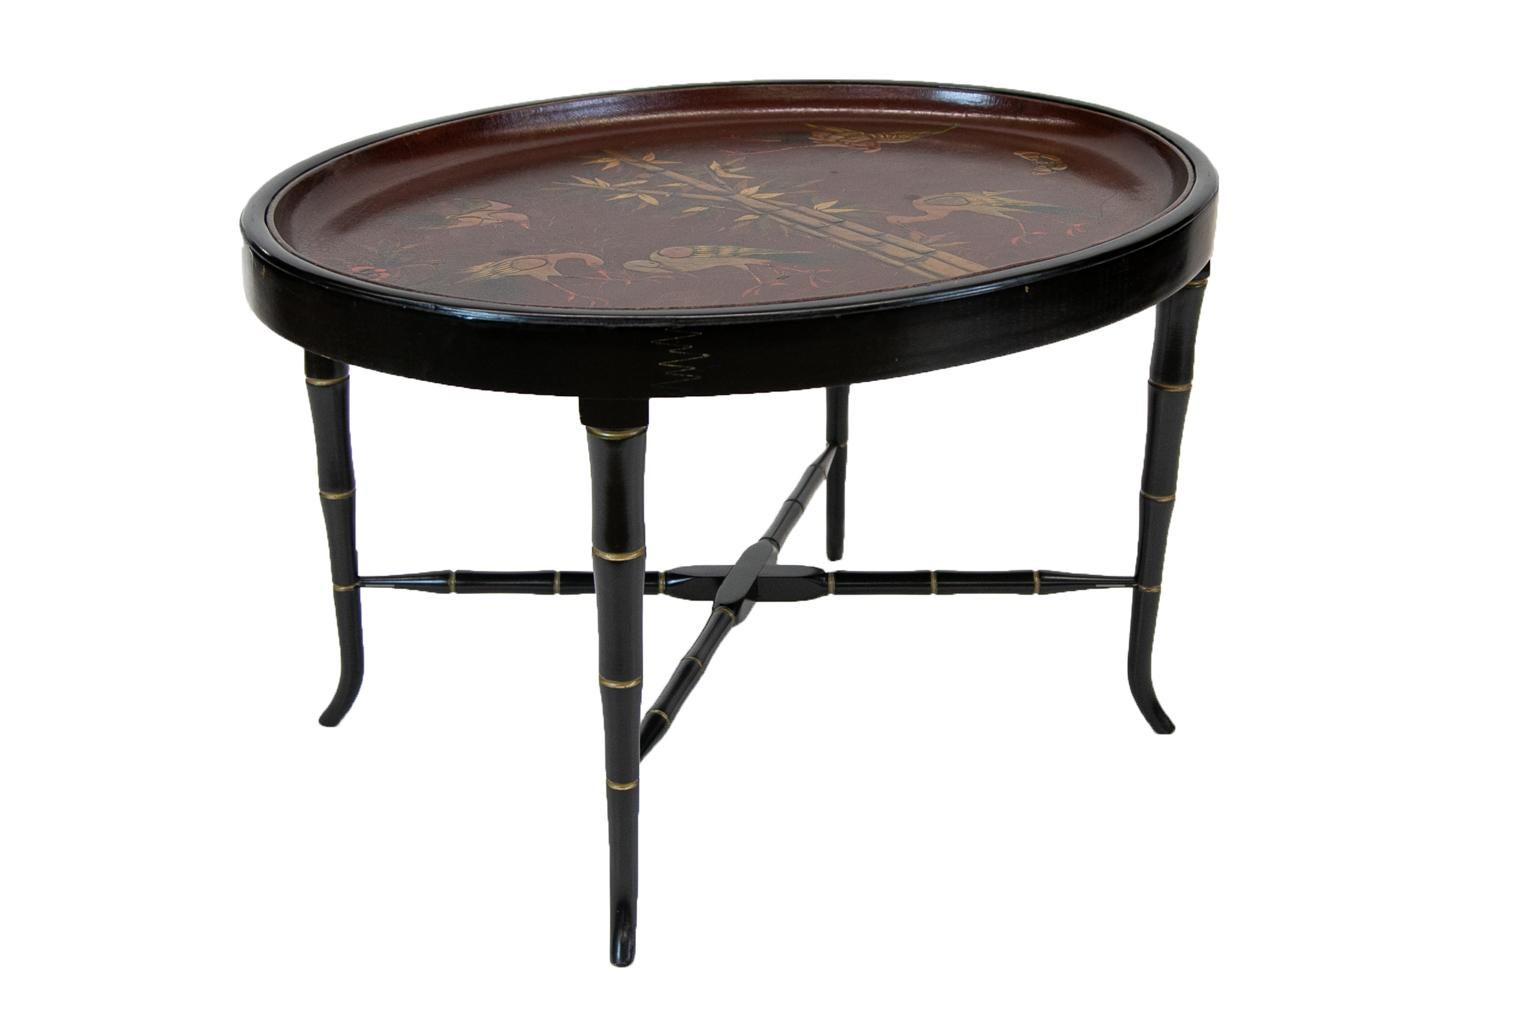 Paper Mâché Lacquer Tray Table In Good Condition For Sale In Wilson, NC